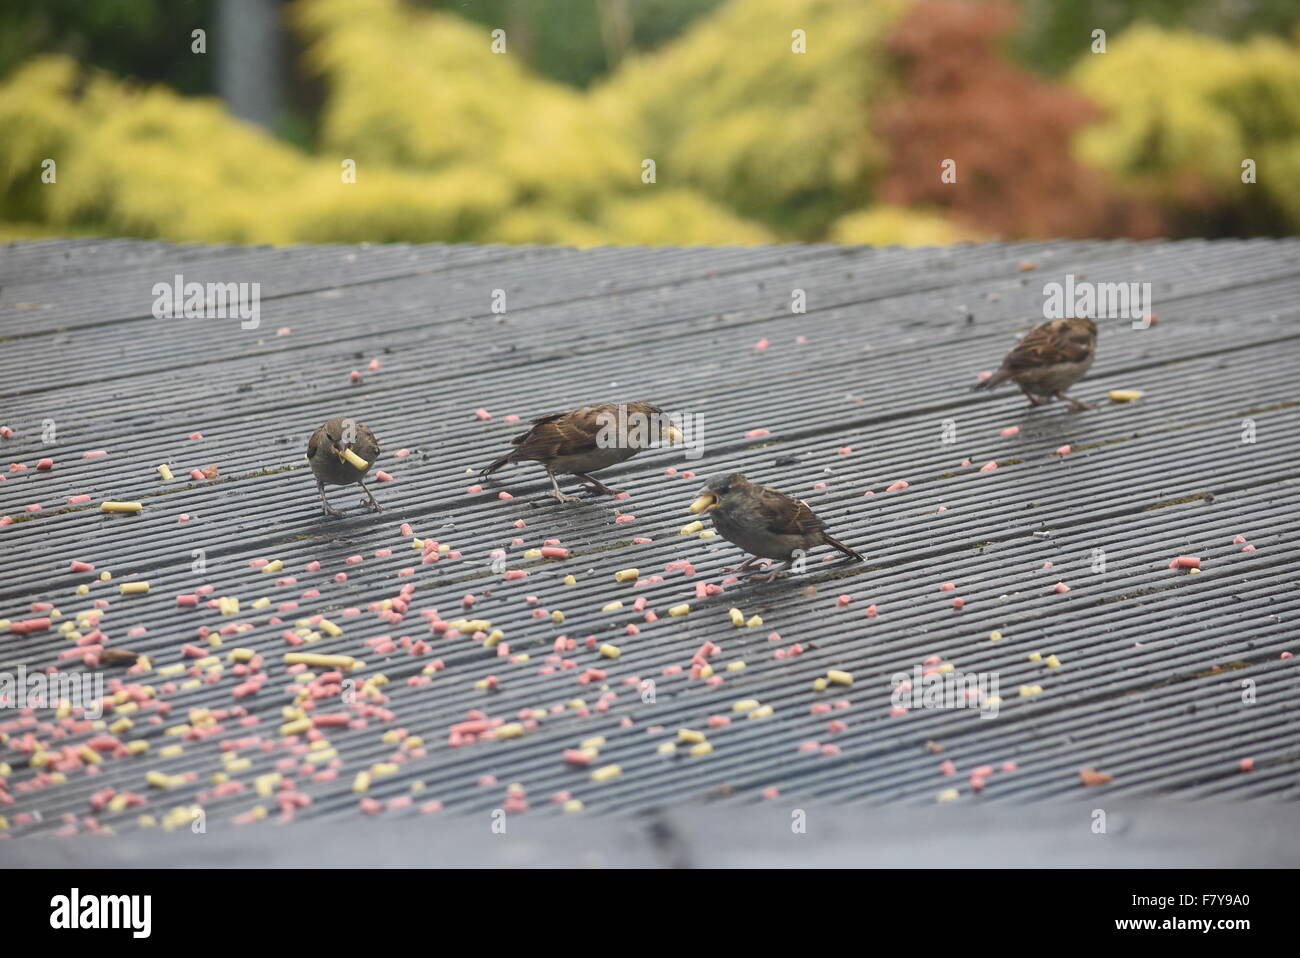 Wales, United Kingdom. July 13 2015. Garden birds pictured eating suet pellets on a decking in Risca. Stock Photo